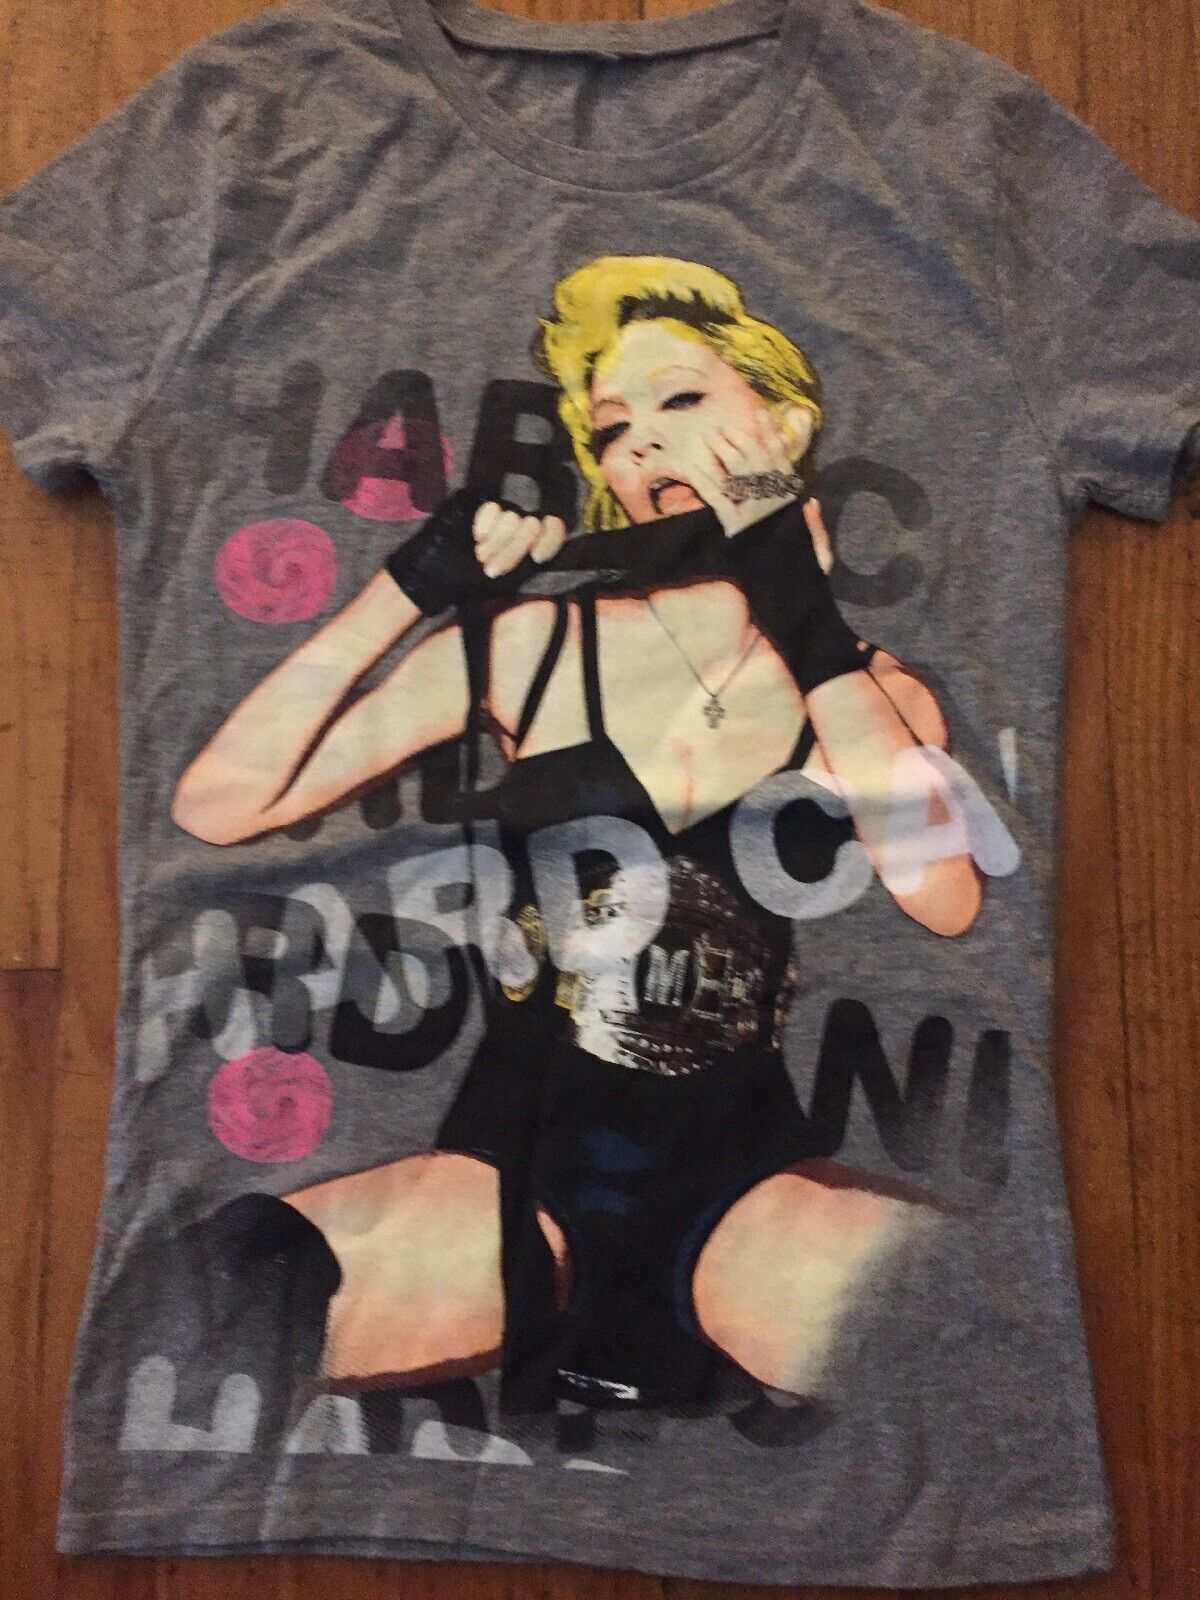 Madonna Hard Candy Official Tee, Tshirt, Tour Merchandise Unworn, Womens Small